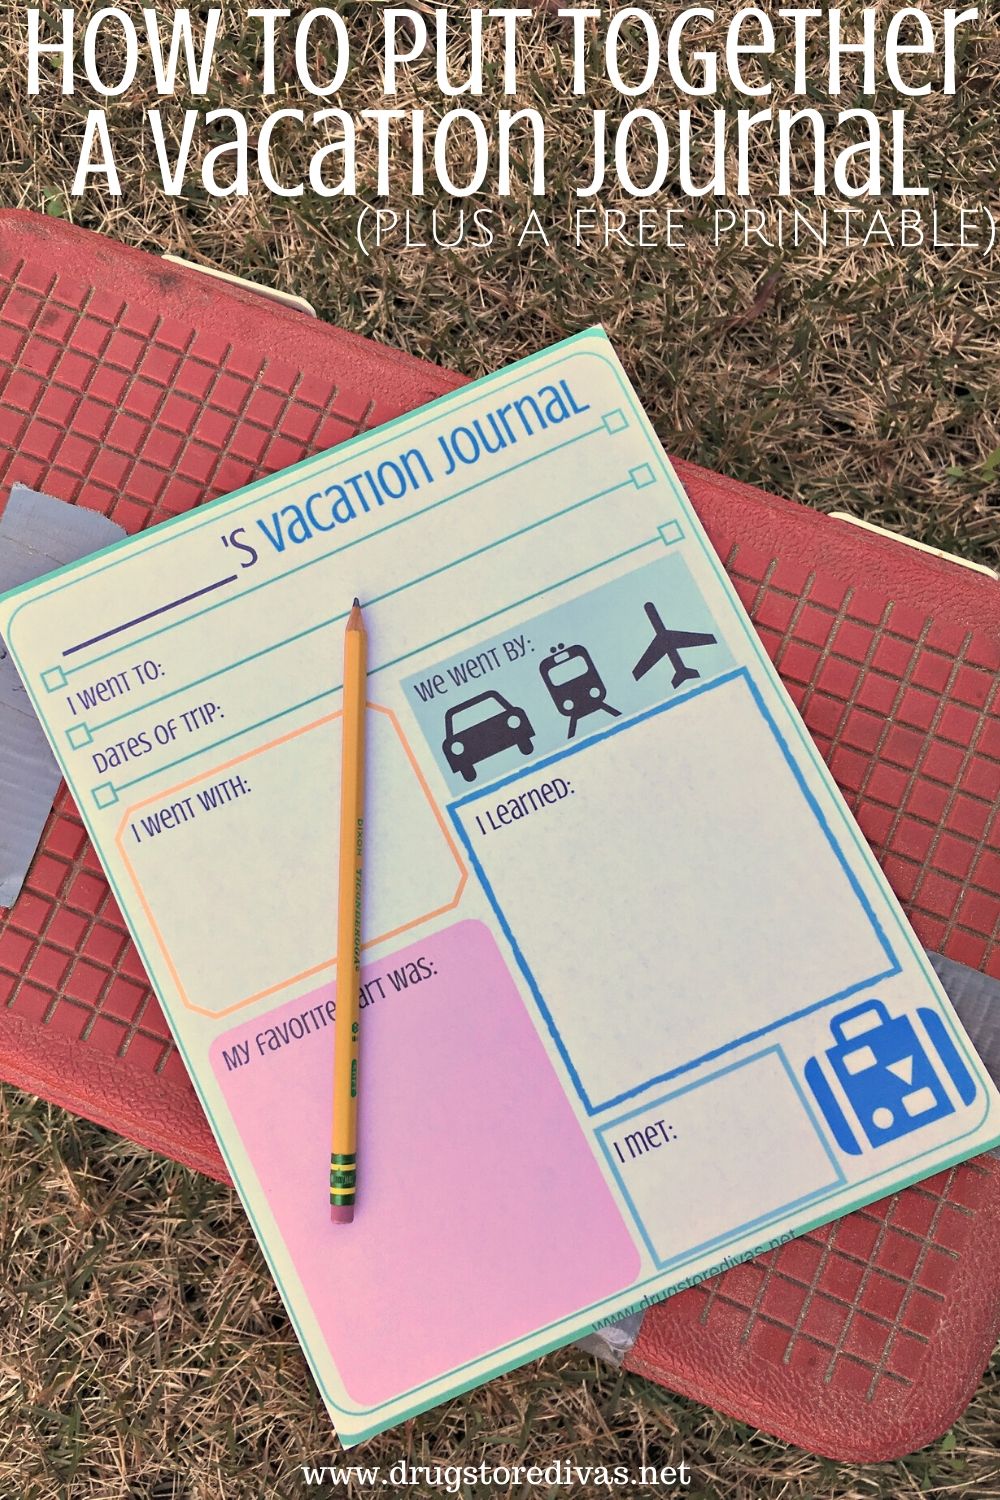 Looking for a fun way for your kids to remember vacation? Check out this free printable vacation journal for kids from www.drugstoredivas.net.